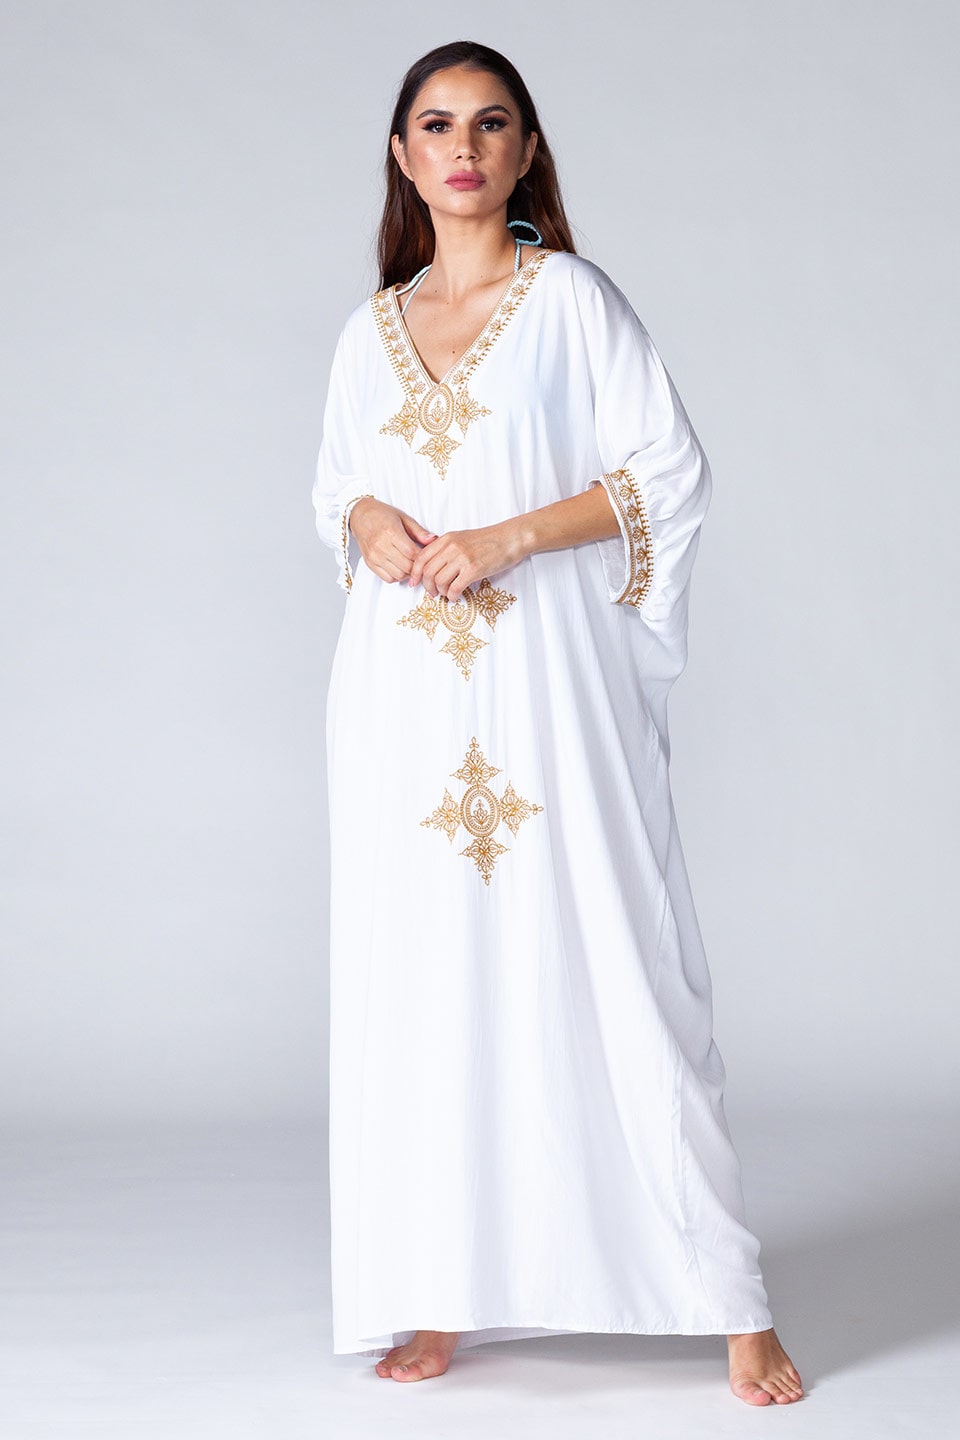 Mid sleeve white kaftan with golden details, model posing for front view